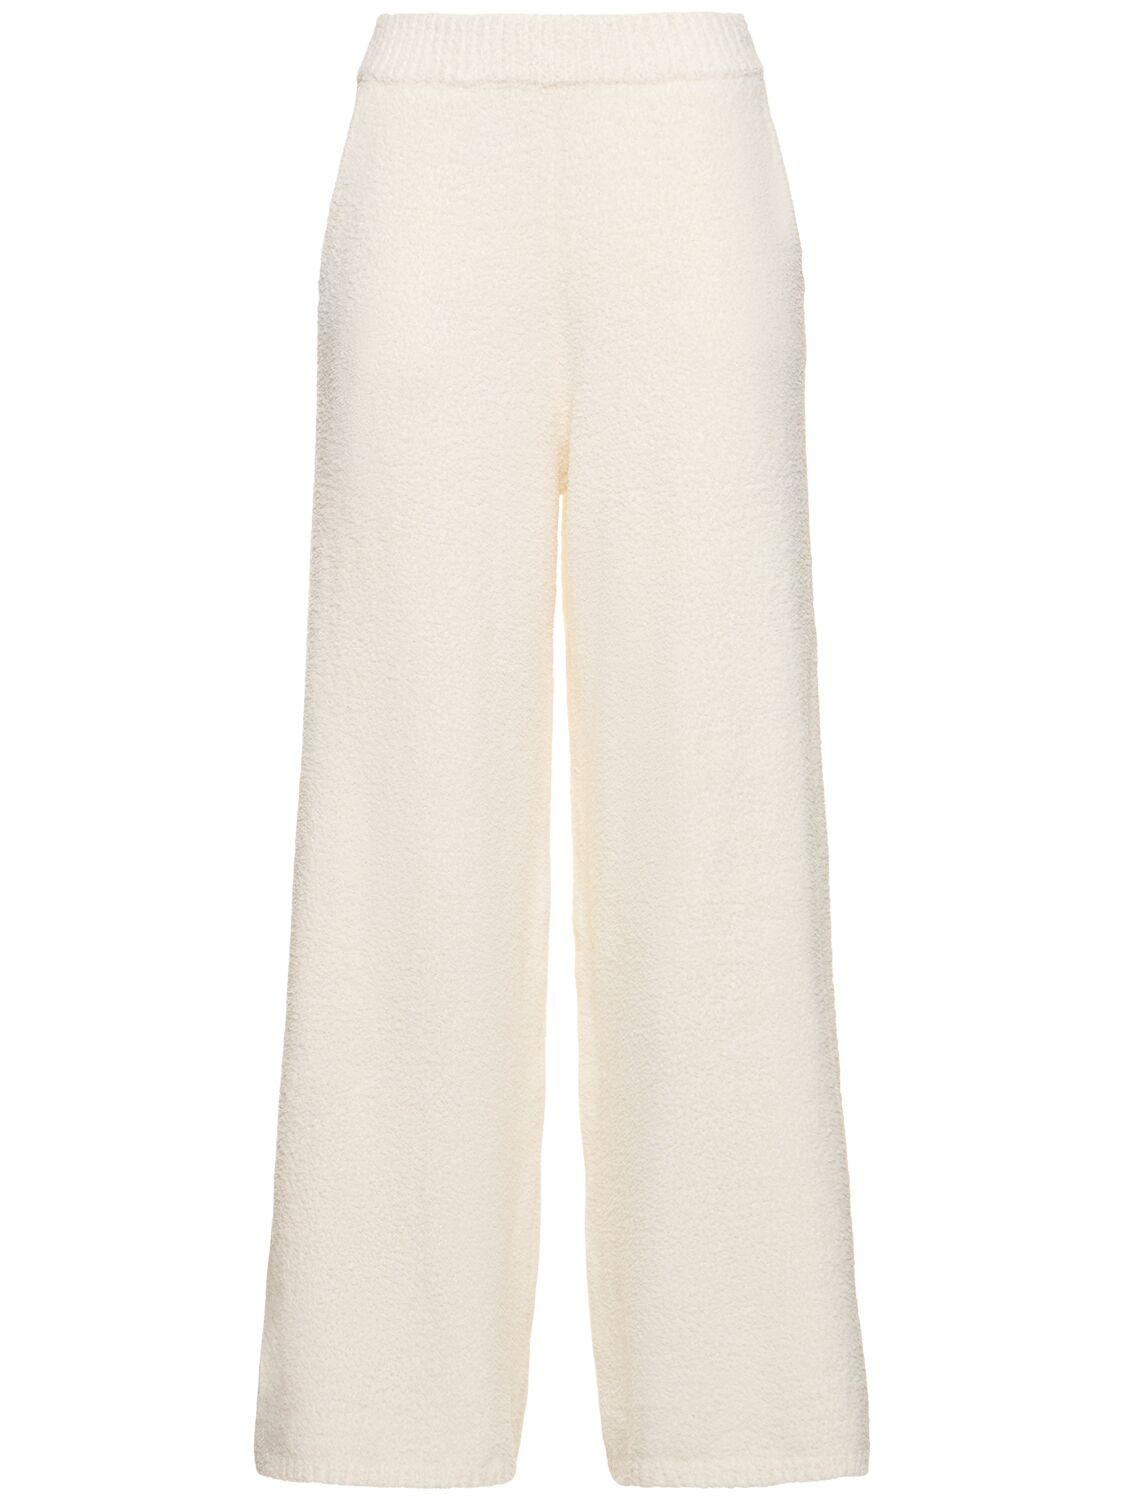 Image of Wide Leg Knitted Pants